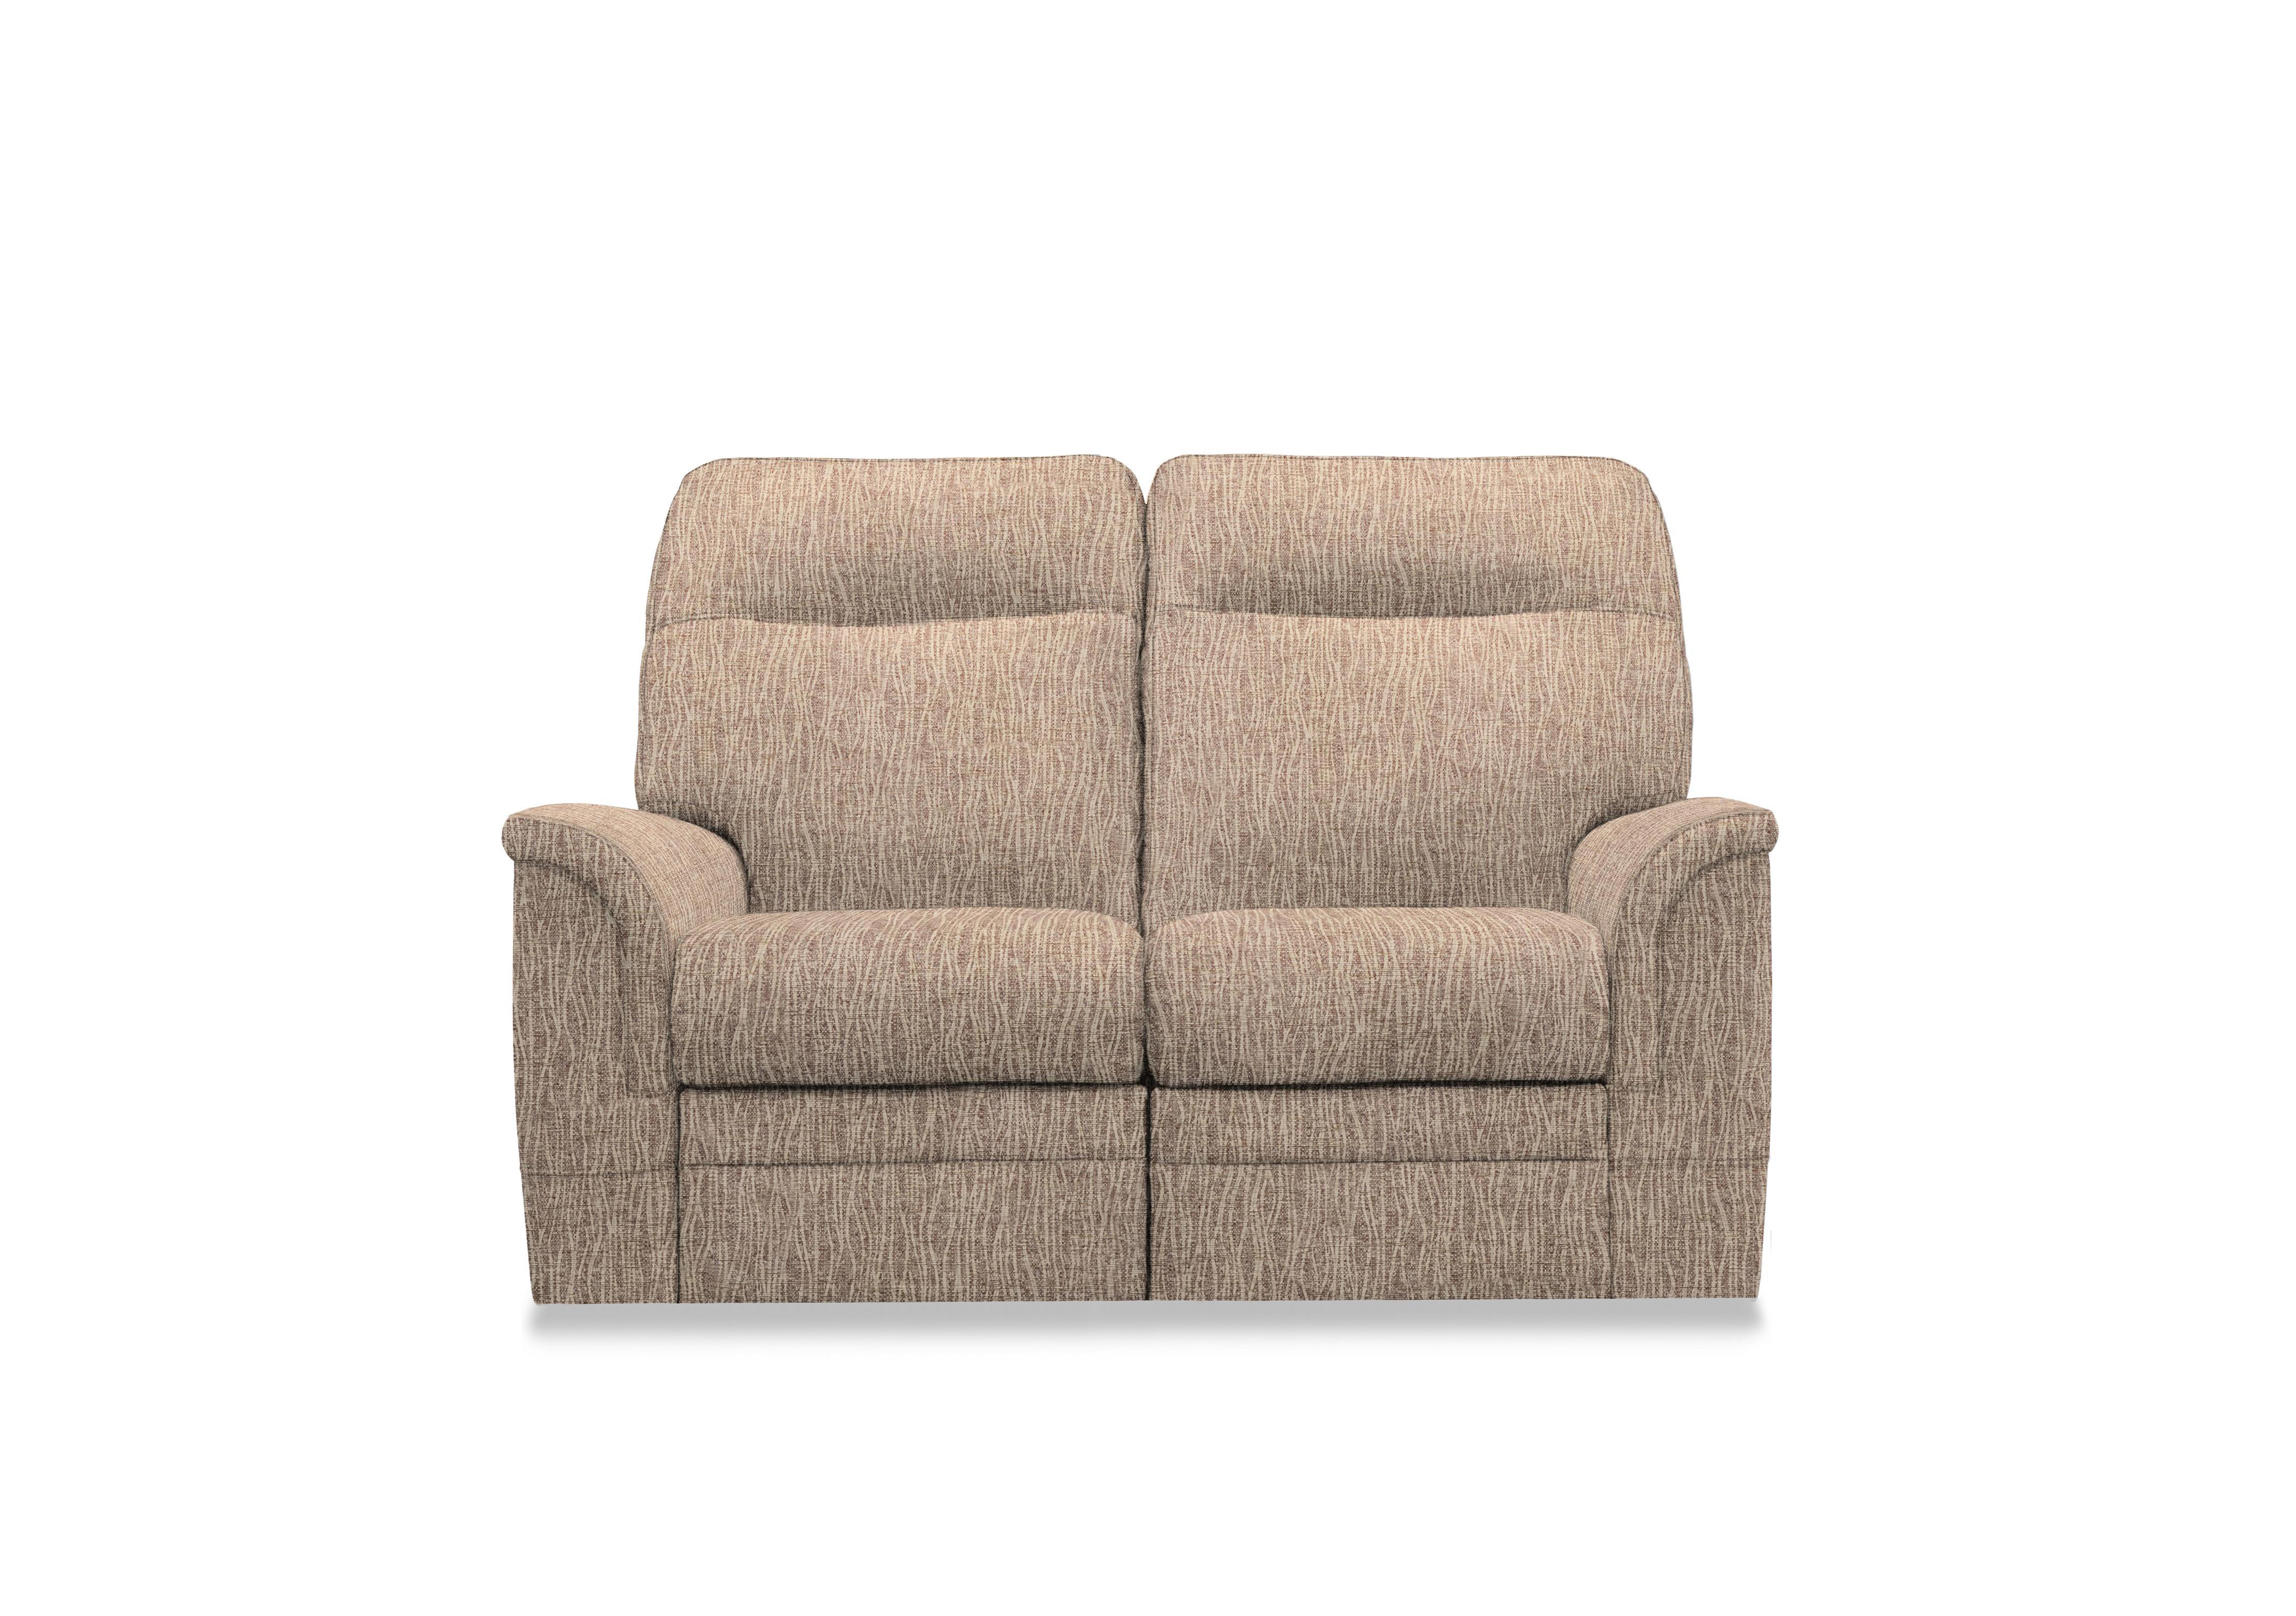 Hudson 23 Fabric 2 Seater Power Recliner Sofa with Power Headrests and Power Lumbar in Dune Sand 001482-0054 on Furniture Village